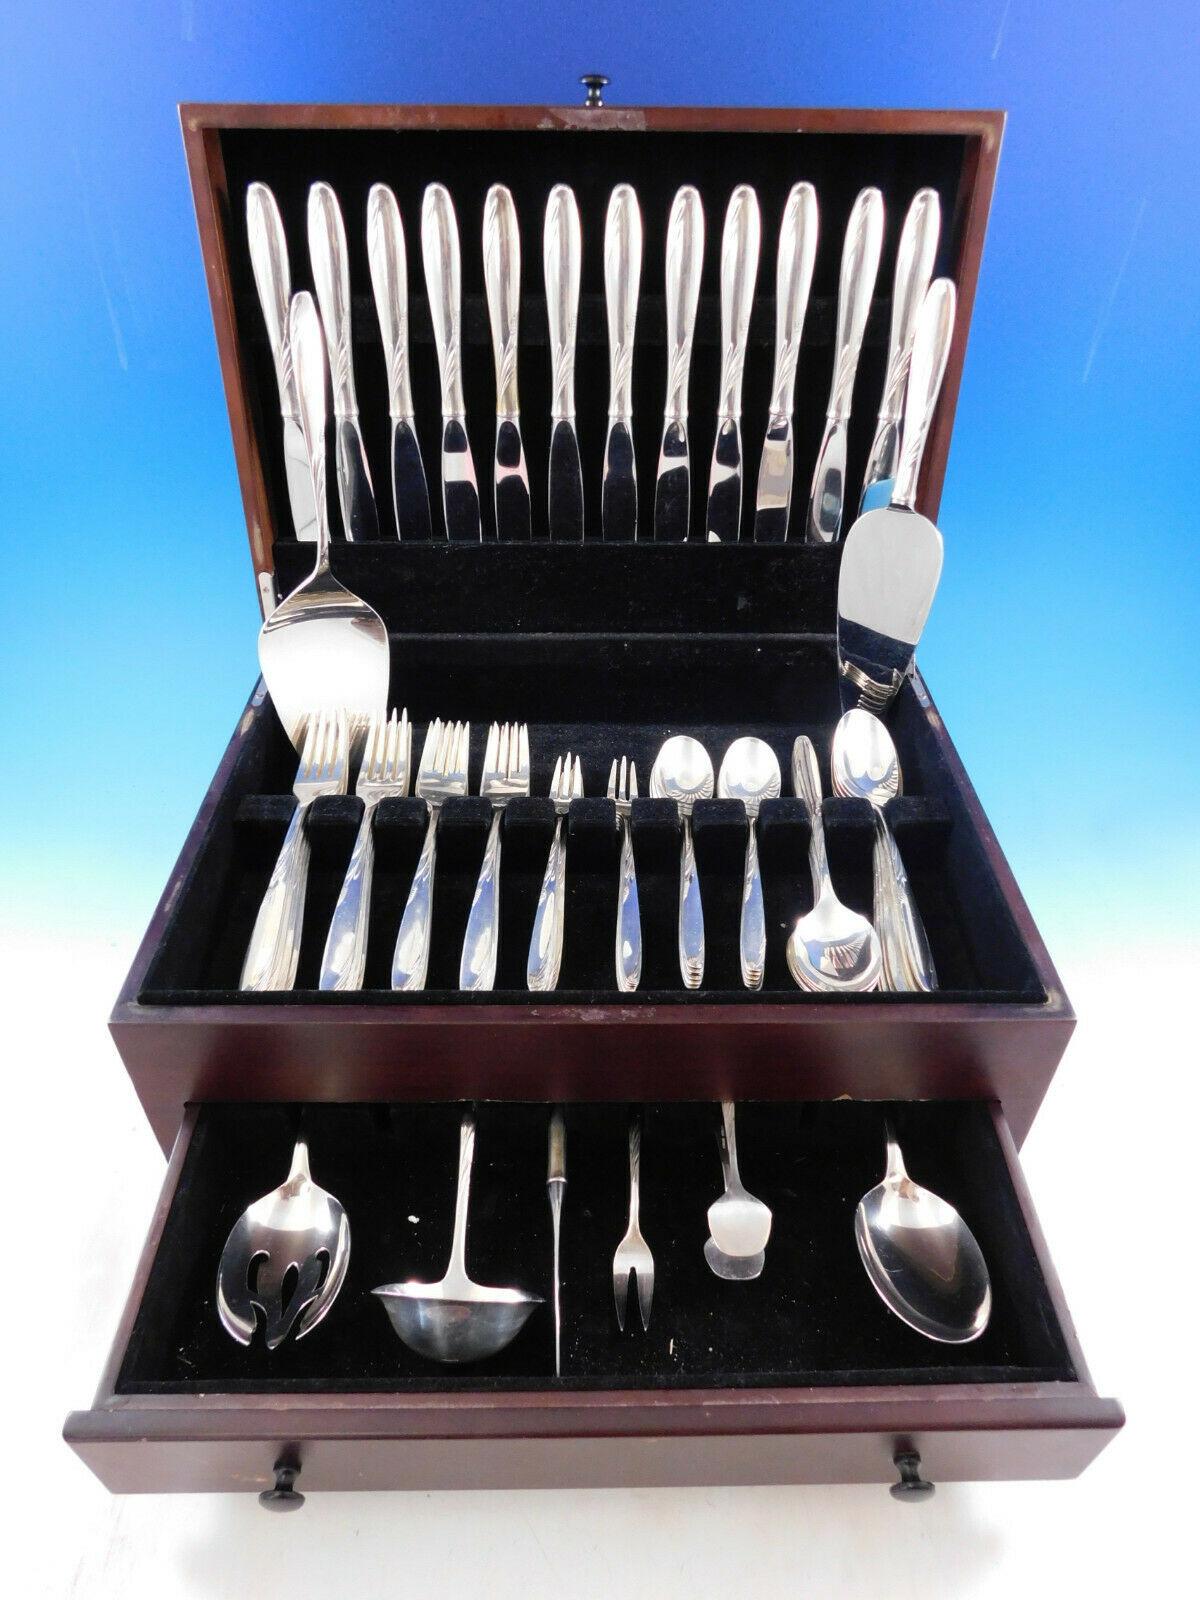 Mid-Century Modern Willow by Gorham circa 1954 Sterling Silver flatware set - 80 pieces. This set includes:

12 knives, 9 1/4